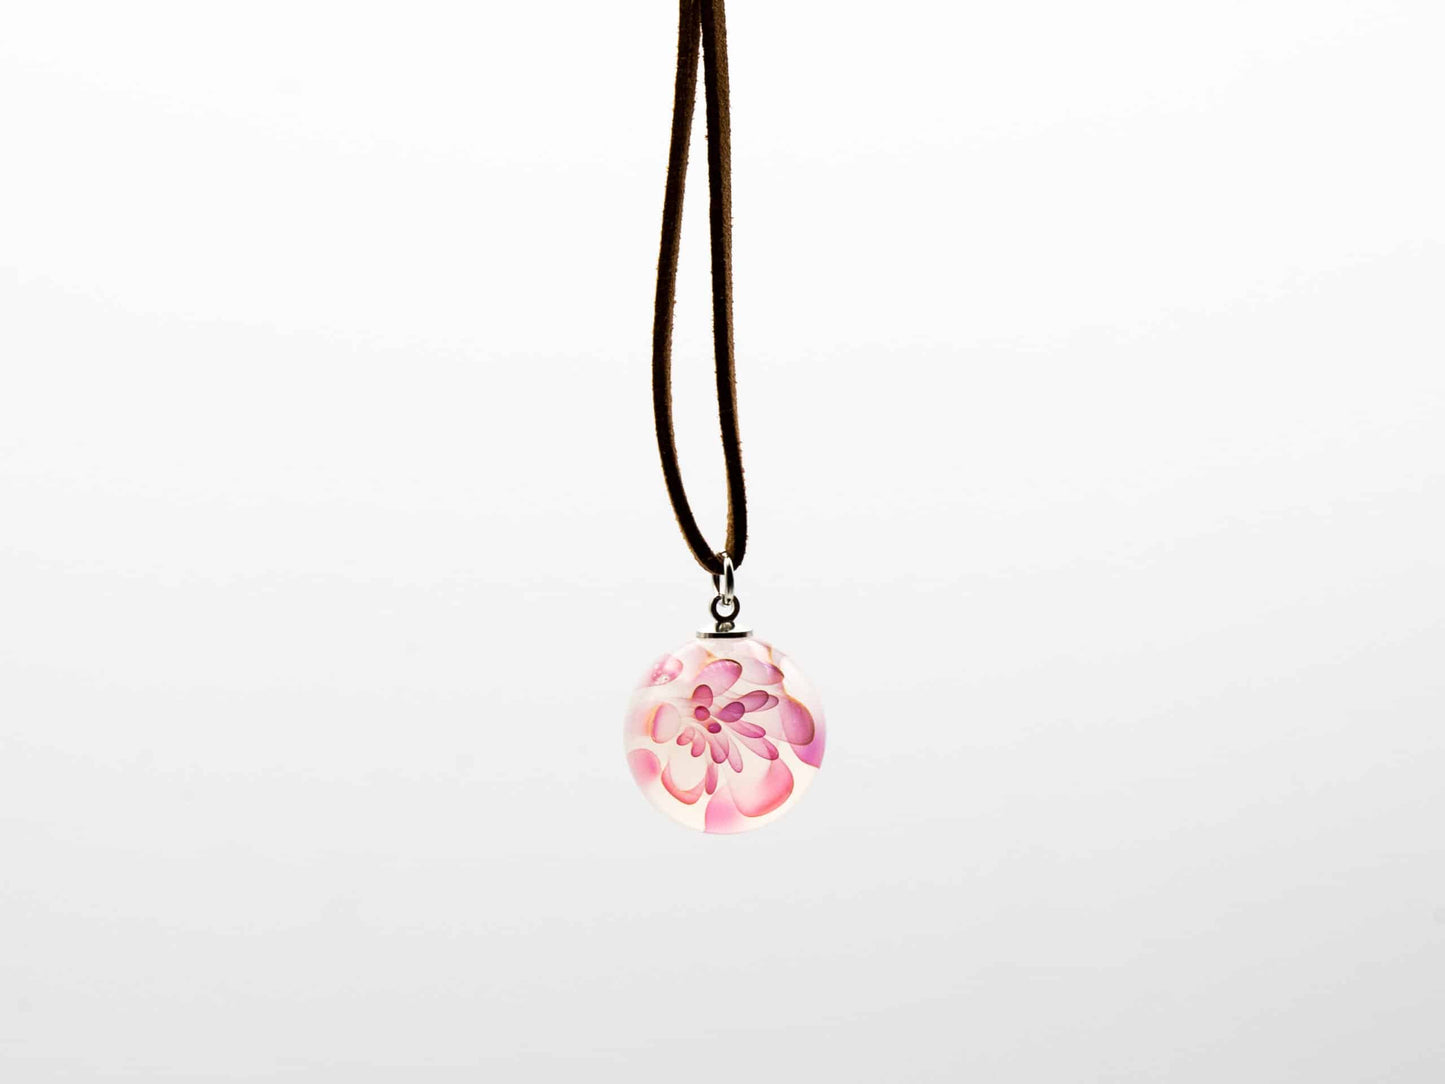 meticulously crafted glass pendant - (CS3) Small White Cherry Blossom Pendant by ColorWorks